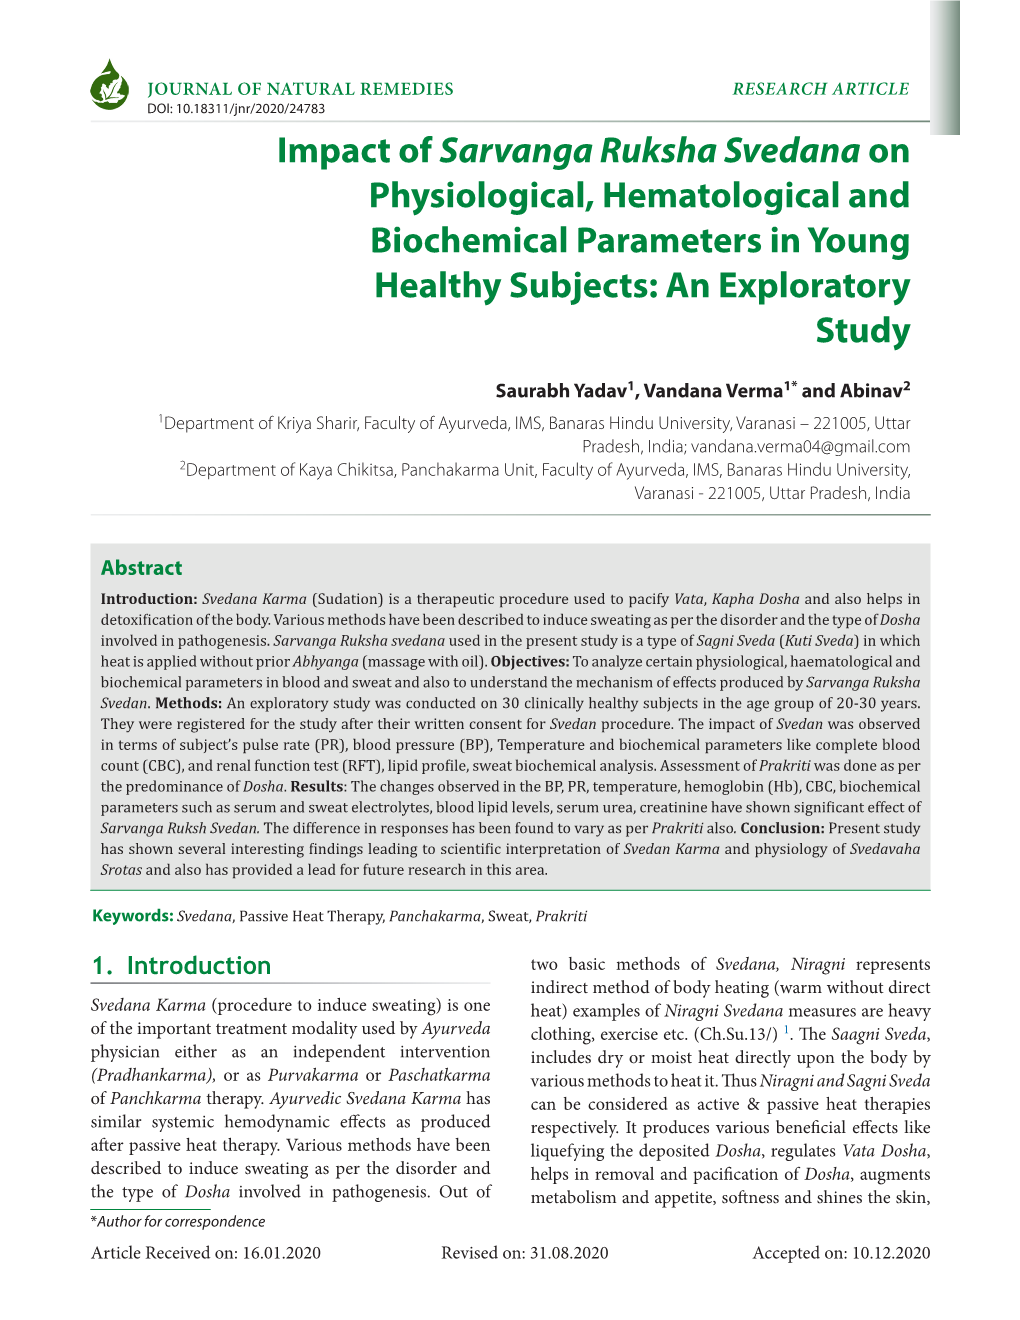 Impact of Sarvanga Ruksha Svedana on Physiological, Hematological and Biochemical Parameters in Young Healthy Subjects: an Exploratory Study